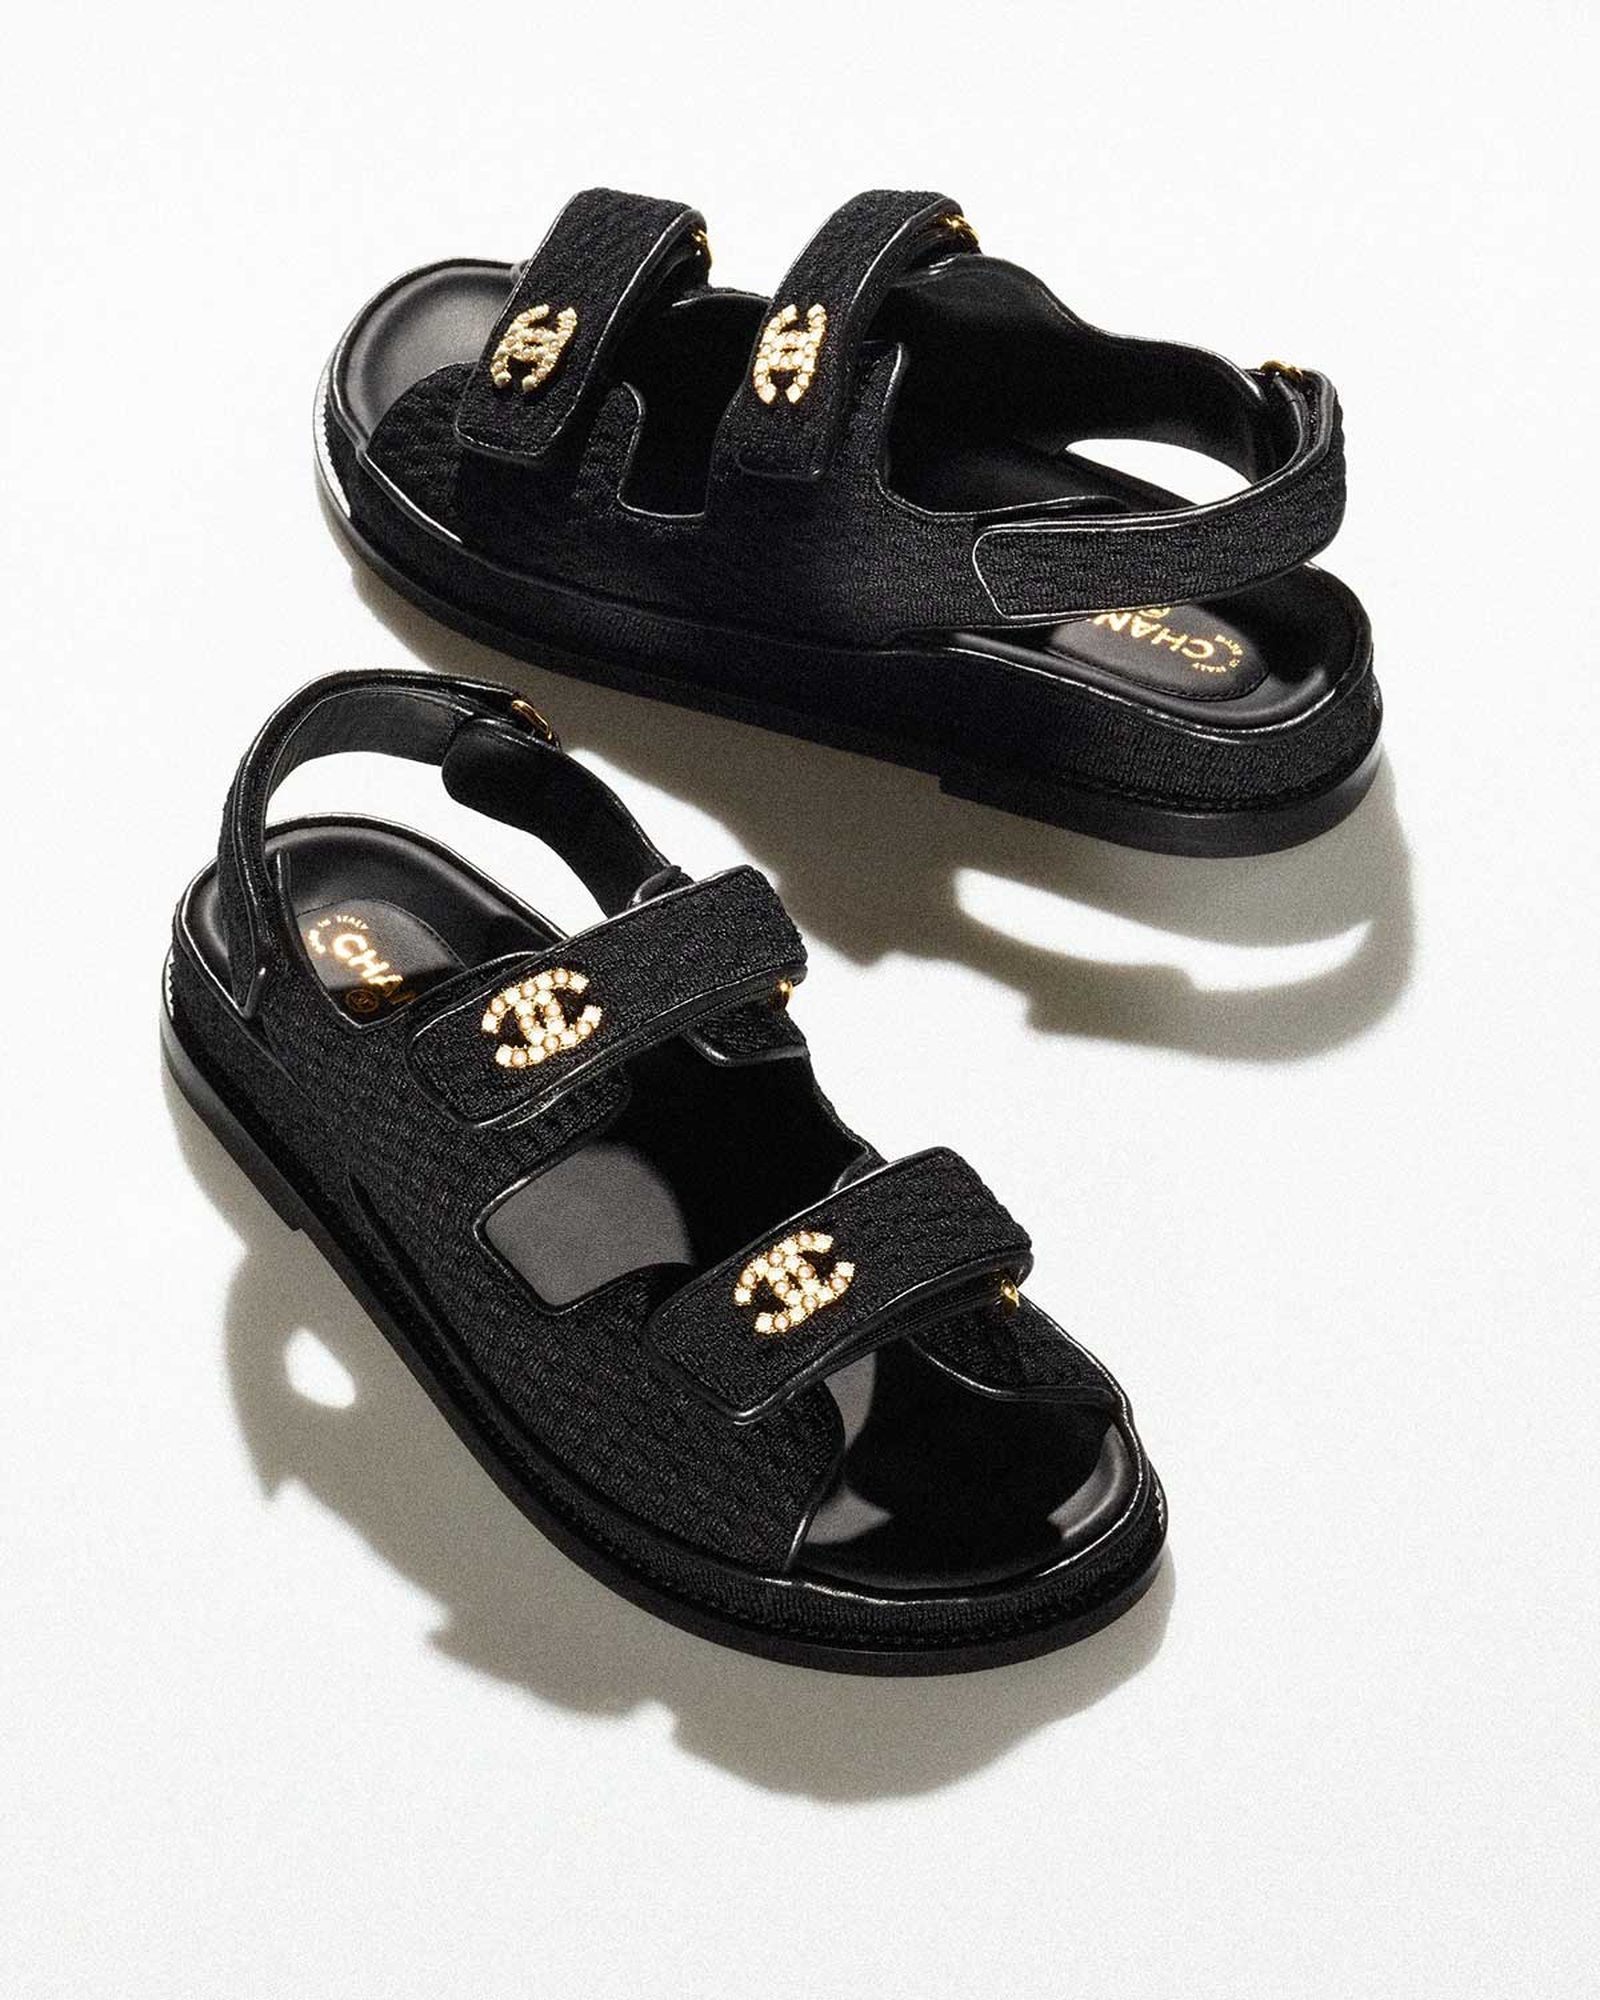 Chanel's "Dad Sandal" Trend Inspired Luxury Dupes